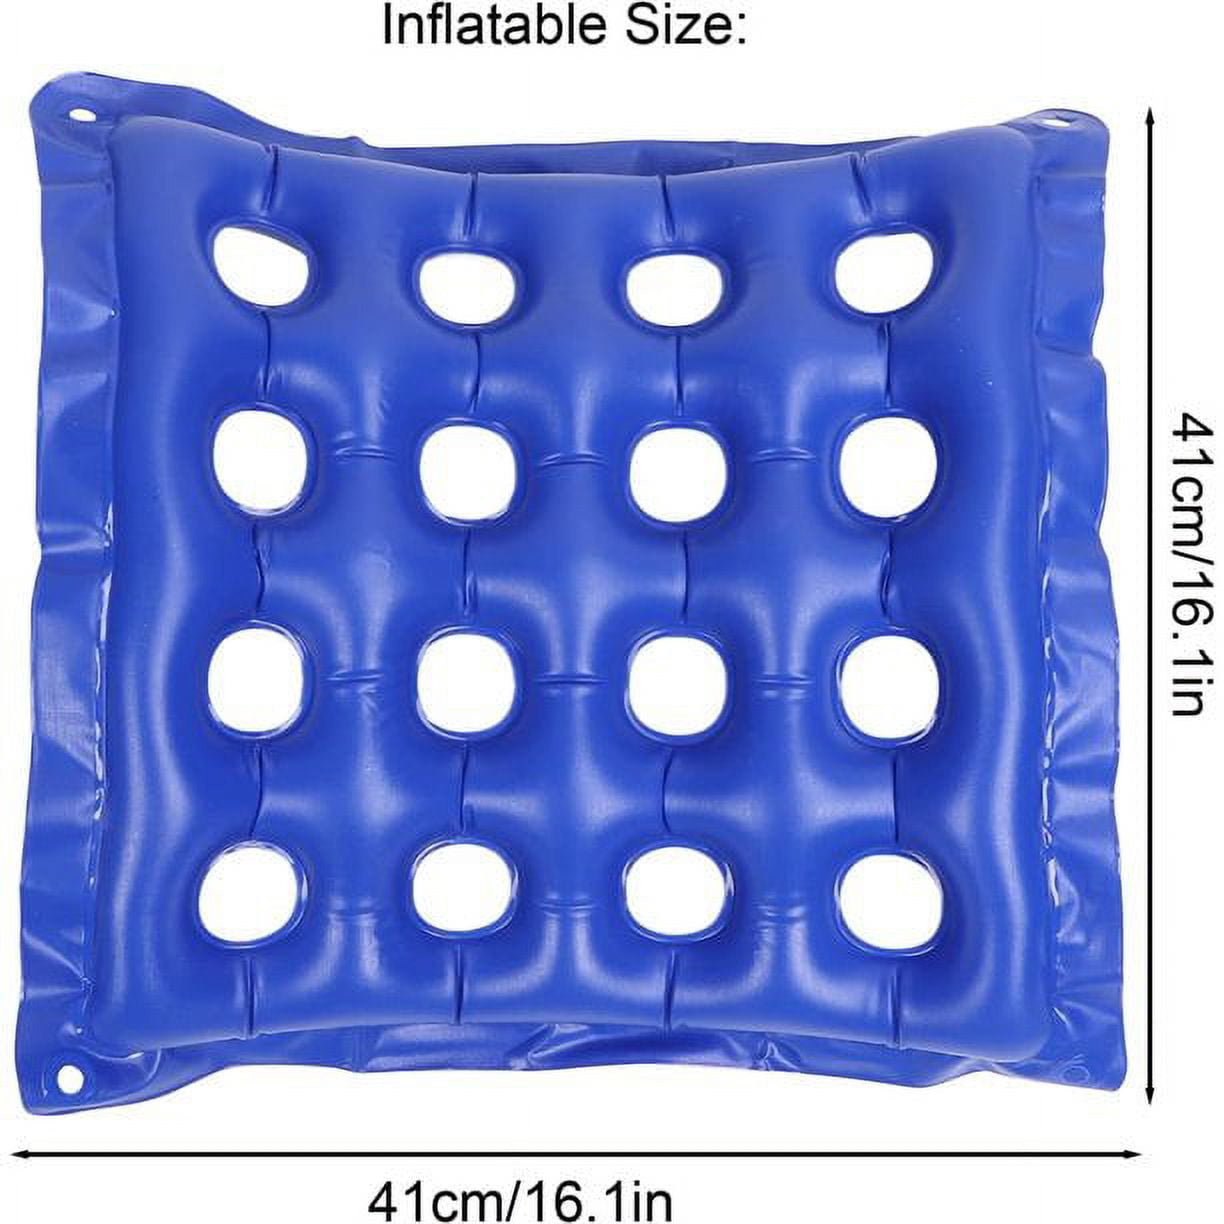 MESINURS Bedridden Air Inflatable Seat Cushion with Full Back for  Wheelchair, Anti-Bedsore Seat Pad for Elderly Disabled Handicap (A)